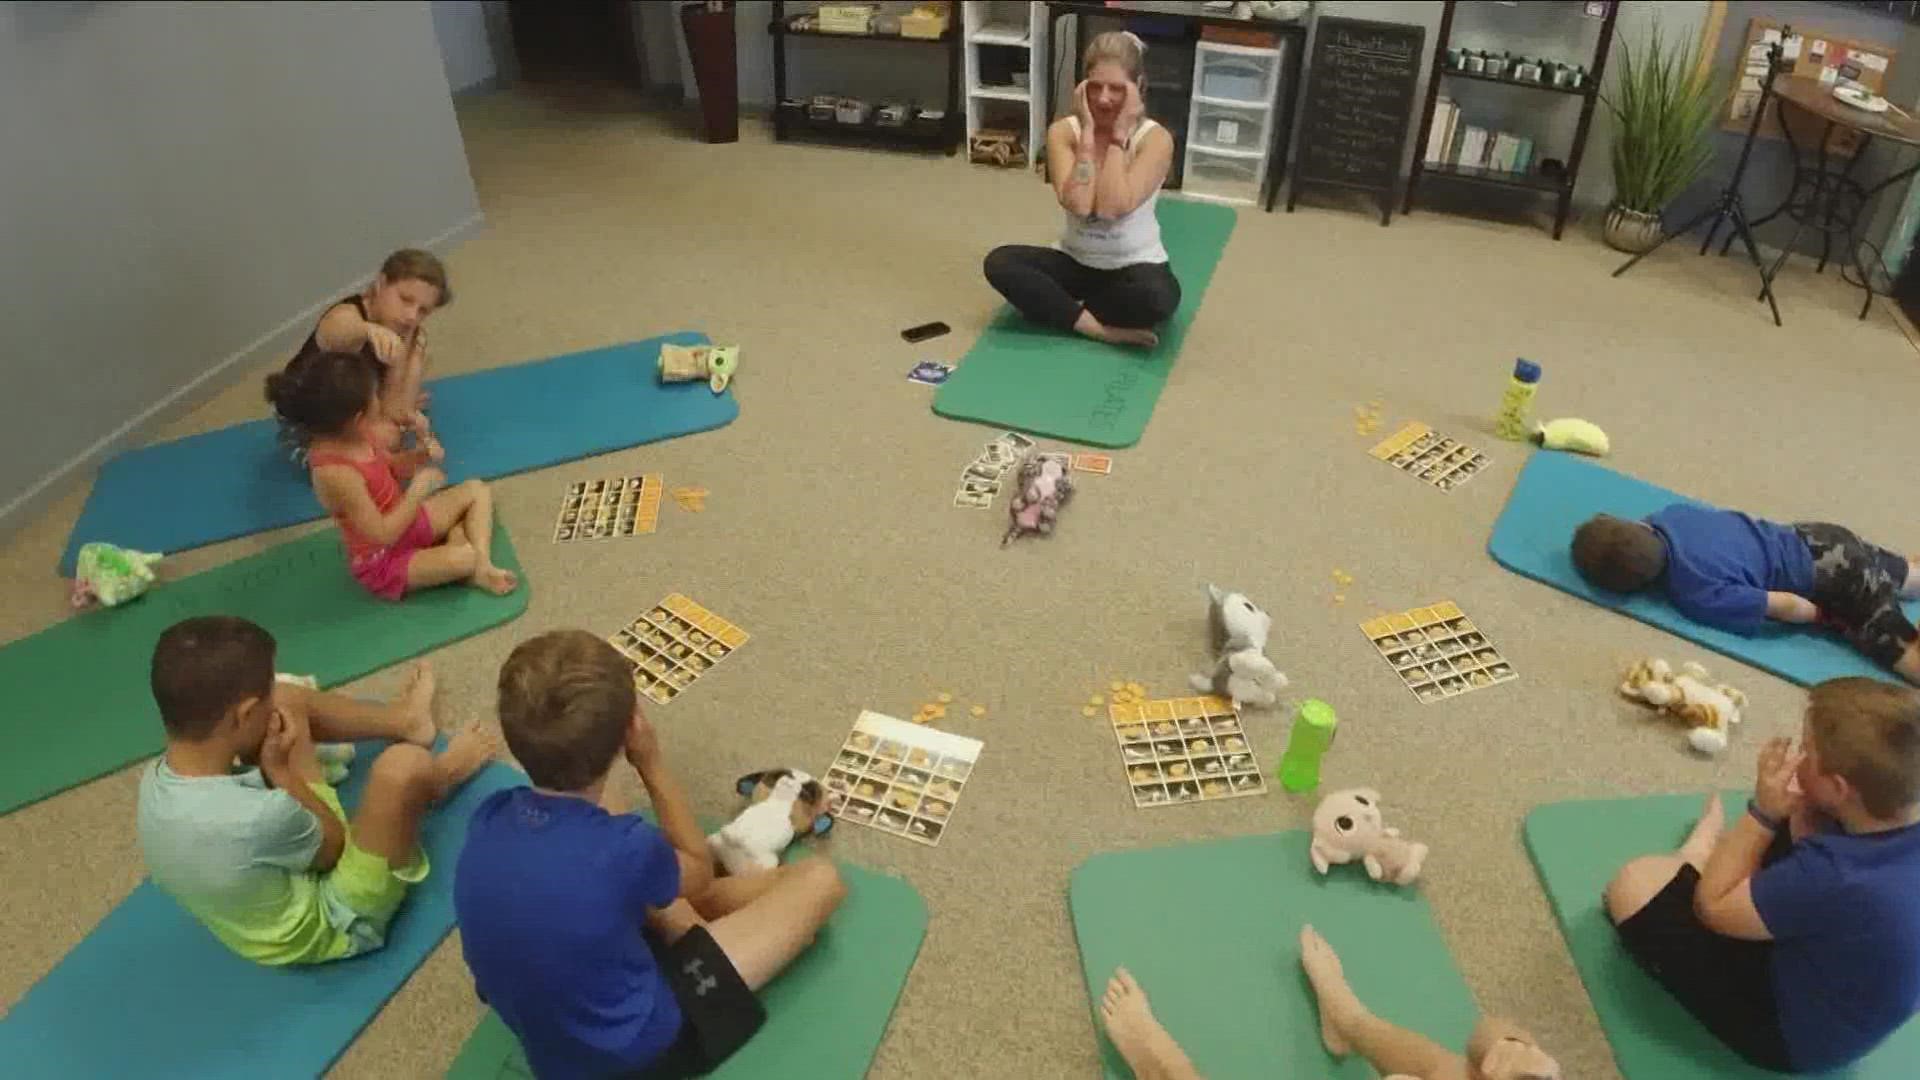 Children dealing with stress and anxiety related to going back to school or other societal problems, could benefit from mindfulness and tapping techniques.